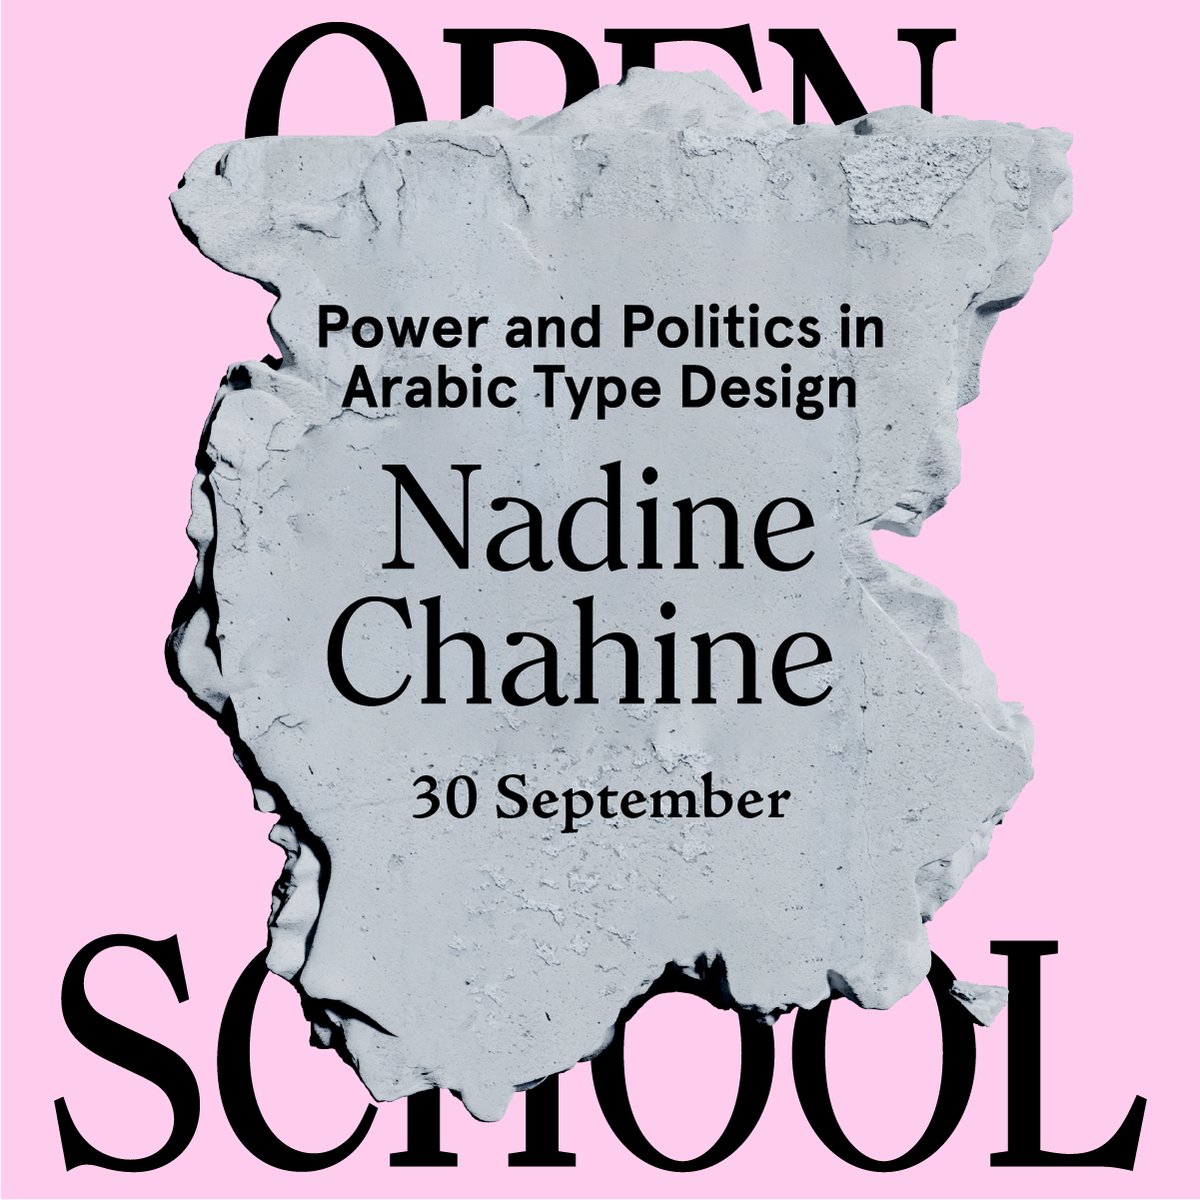 I've been invited by Konstfack university in Stockholm to give a talk about power, politics and type design. Same talk I gave in San Francisco earlier this year. No need to register, just bookmark your calendar for Sept 30 4:30pm Stockholm time:  https://konstfack-se.zoom.us/j/67286885055 